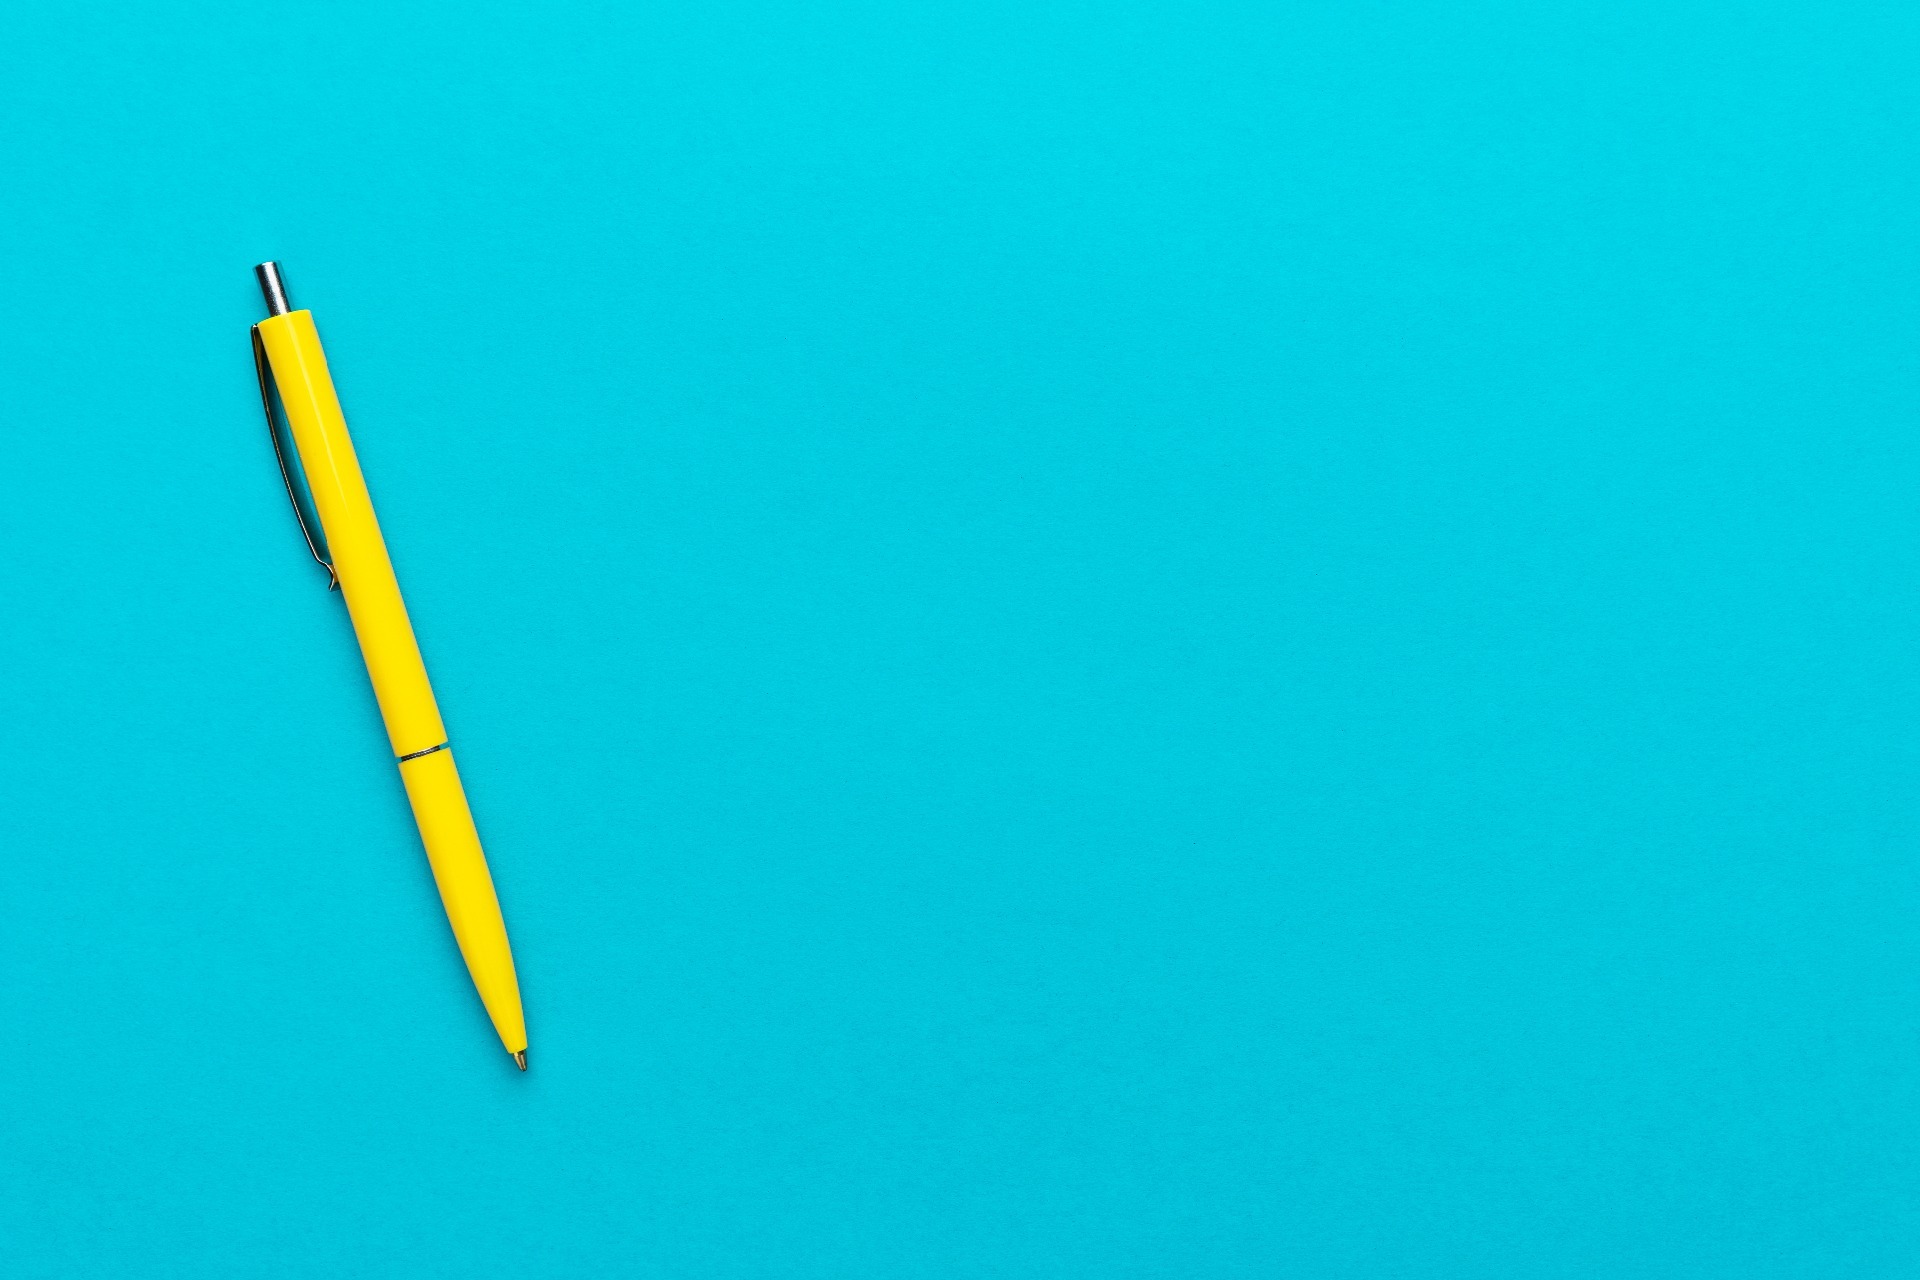 A yellow pen against a blue background.